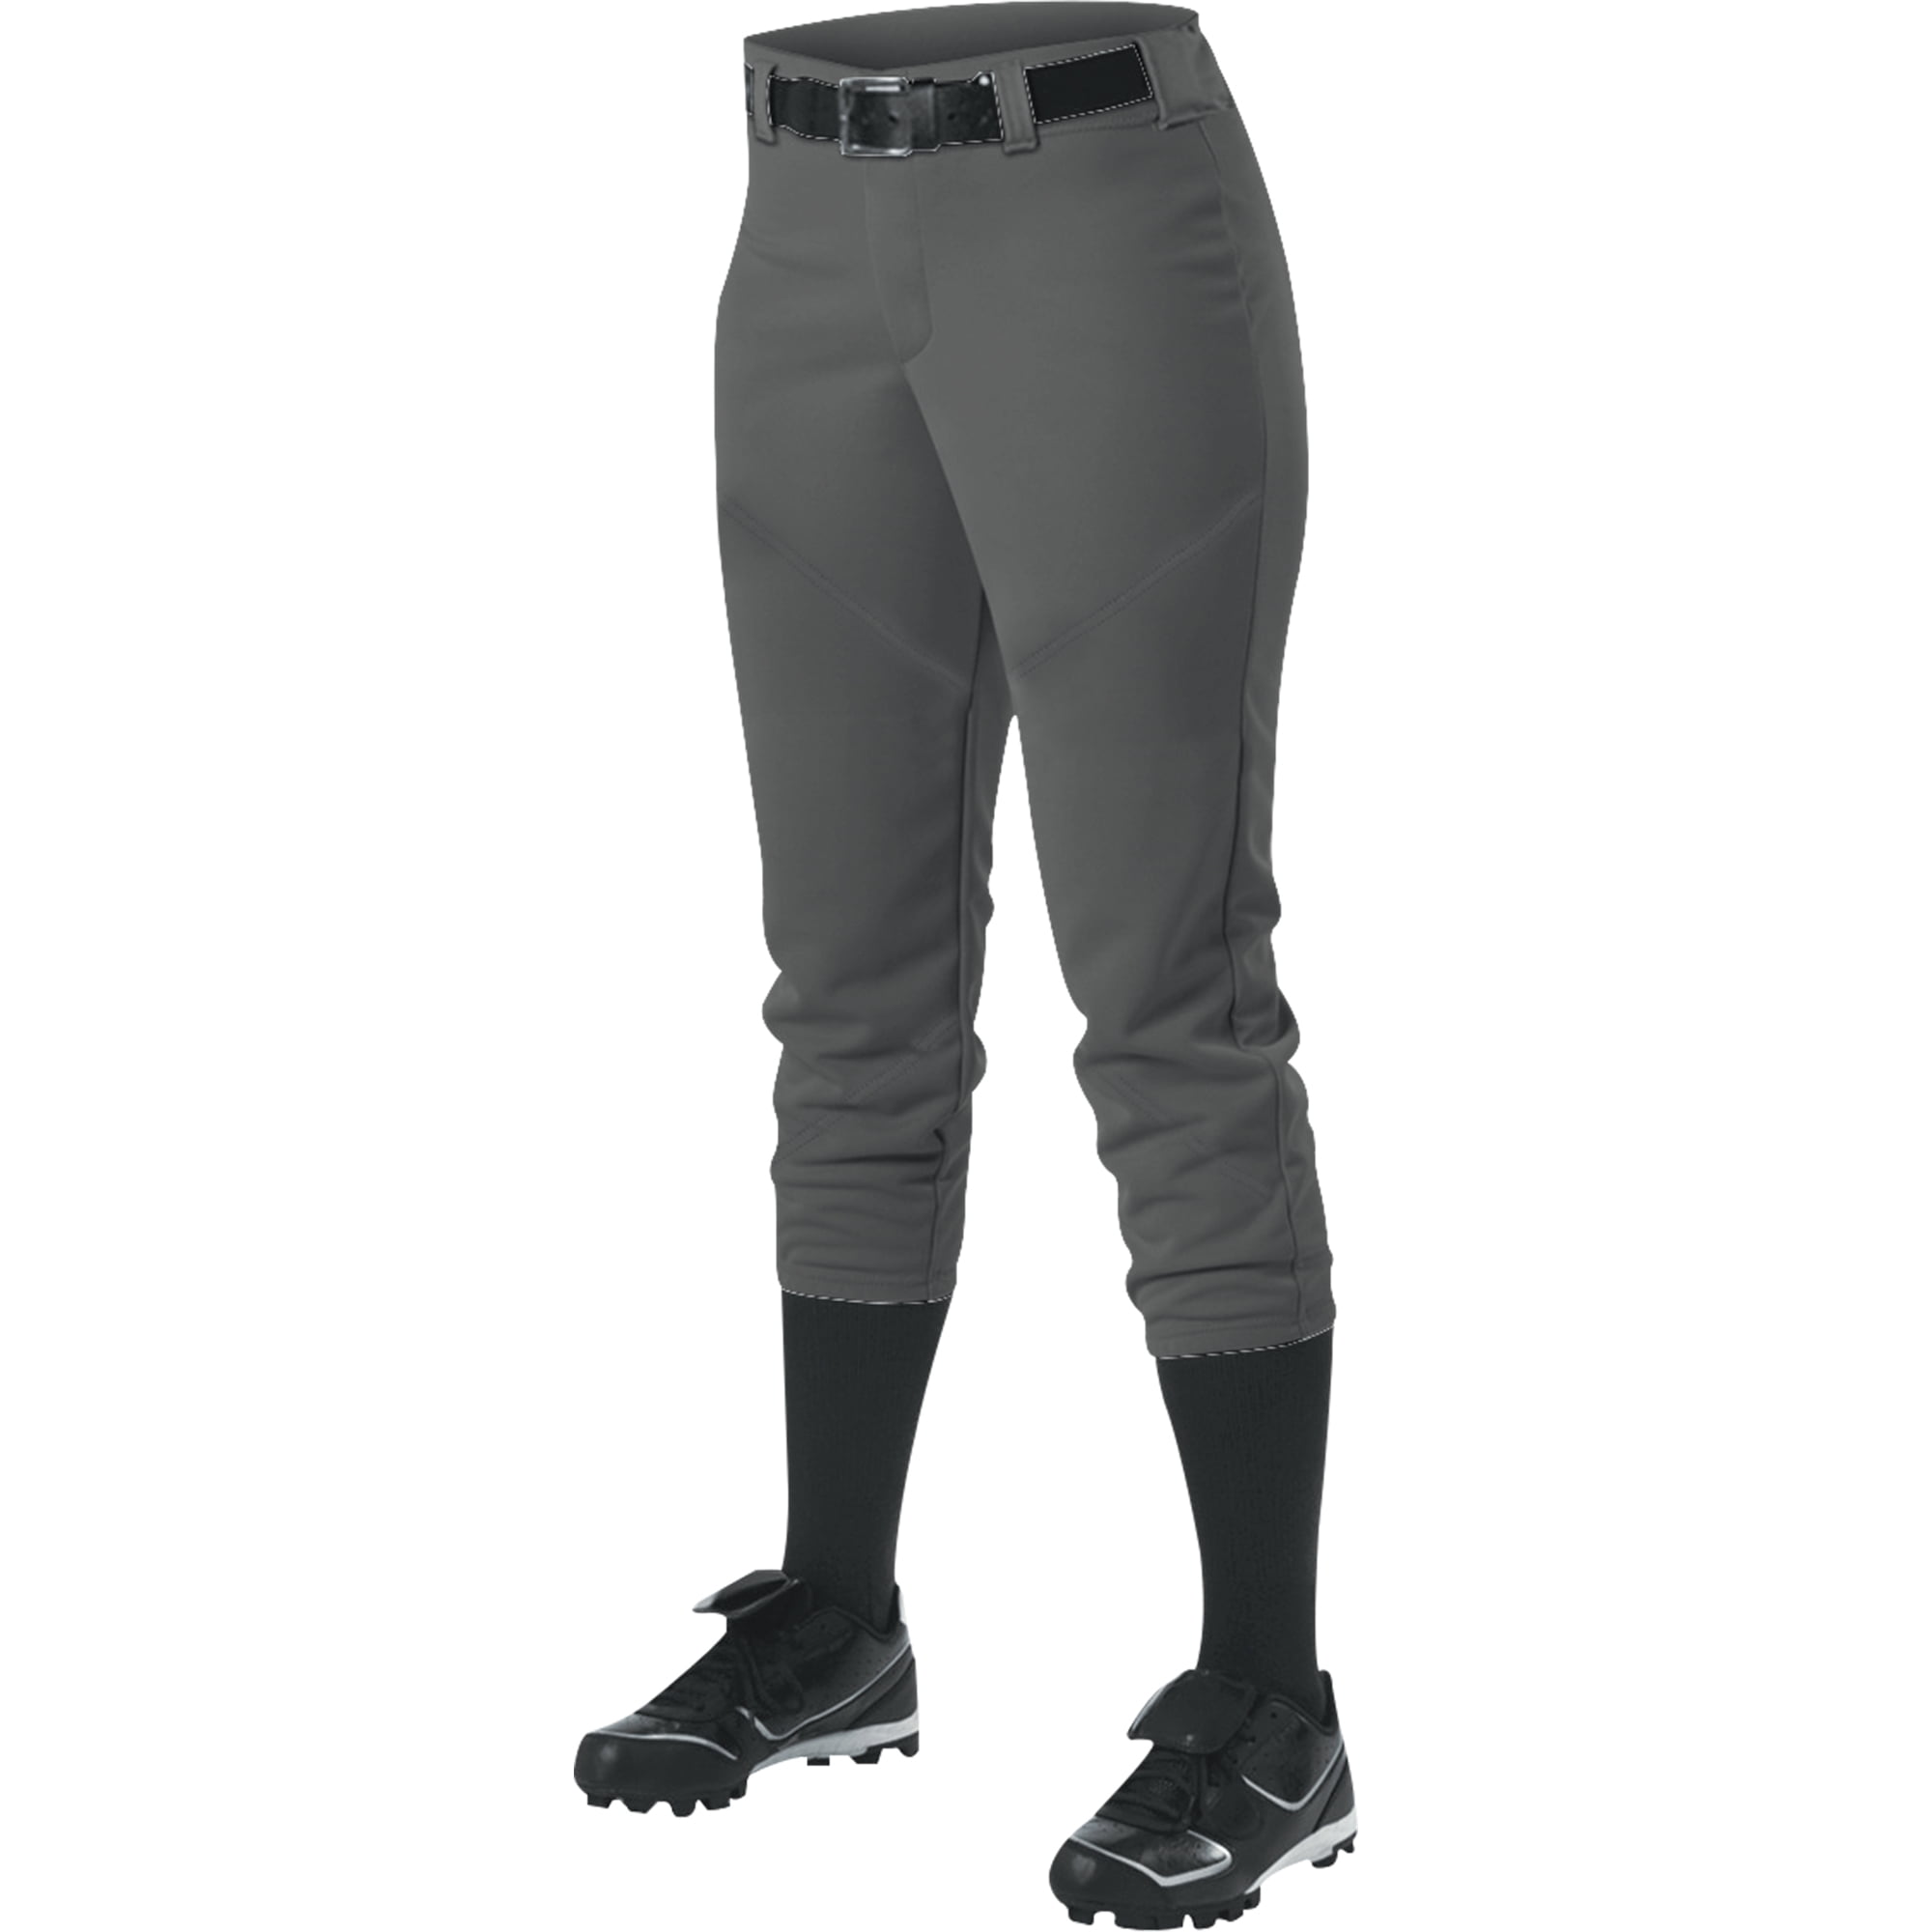 7 Colors DeMarini Fierce Belted Girl's Fastpitch Softball Pant Youth 4 Sizes 